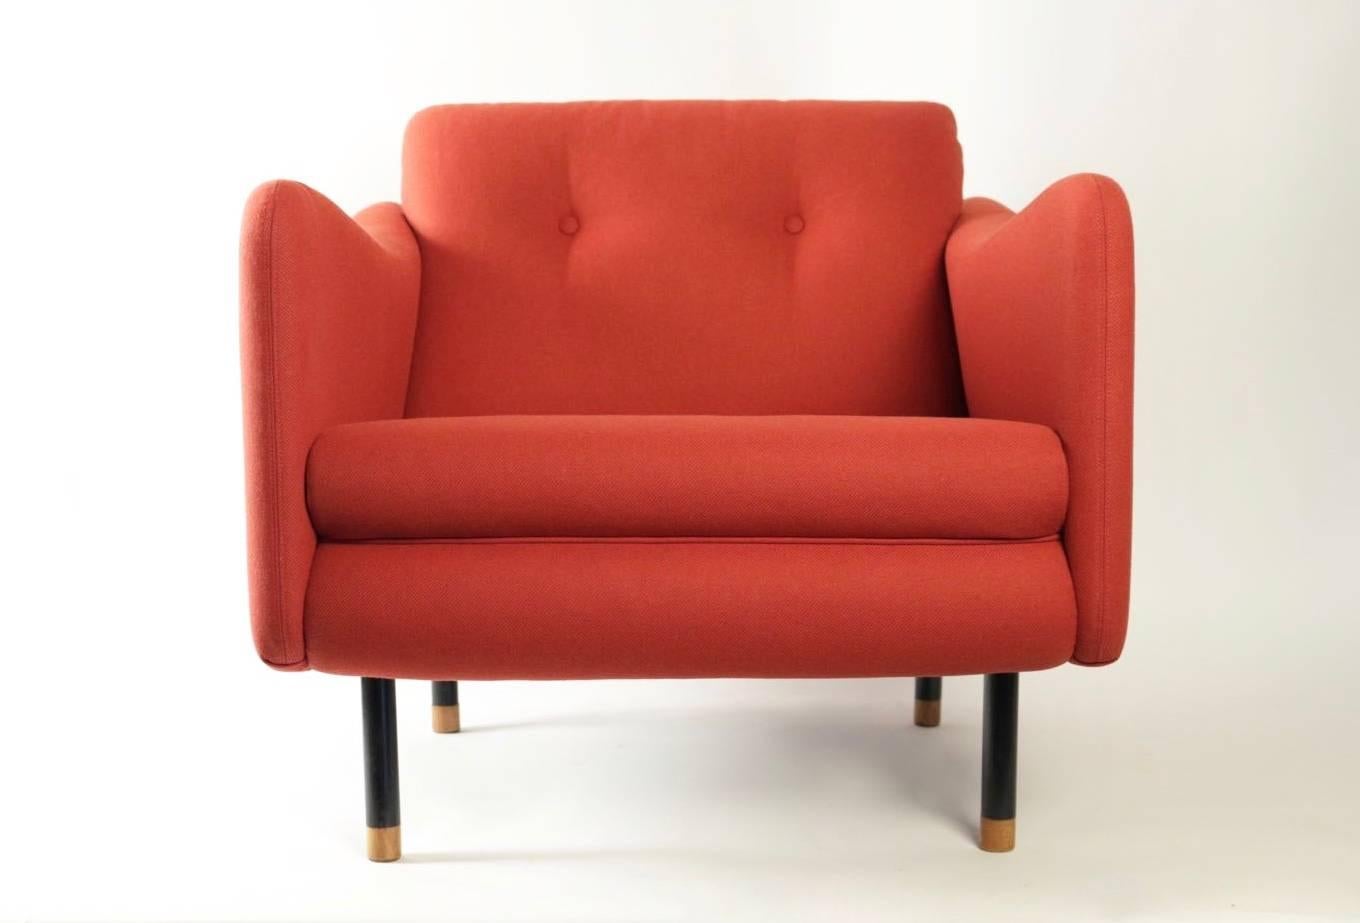 Lounge set with two armchairs and one sofa by Michel Mortier for Steiner, France, 1963.

This rare lounge set in perfect condition has been fully restored with a red wool fabric and all the foams have been changed to restore the original outlines.